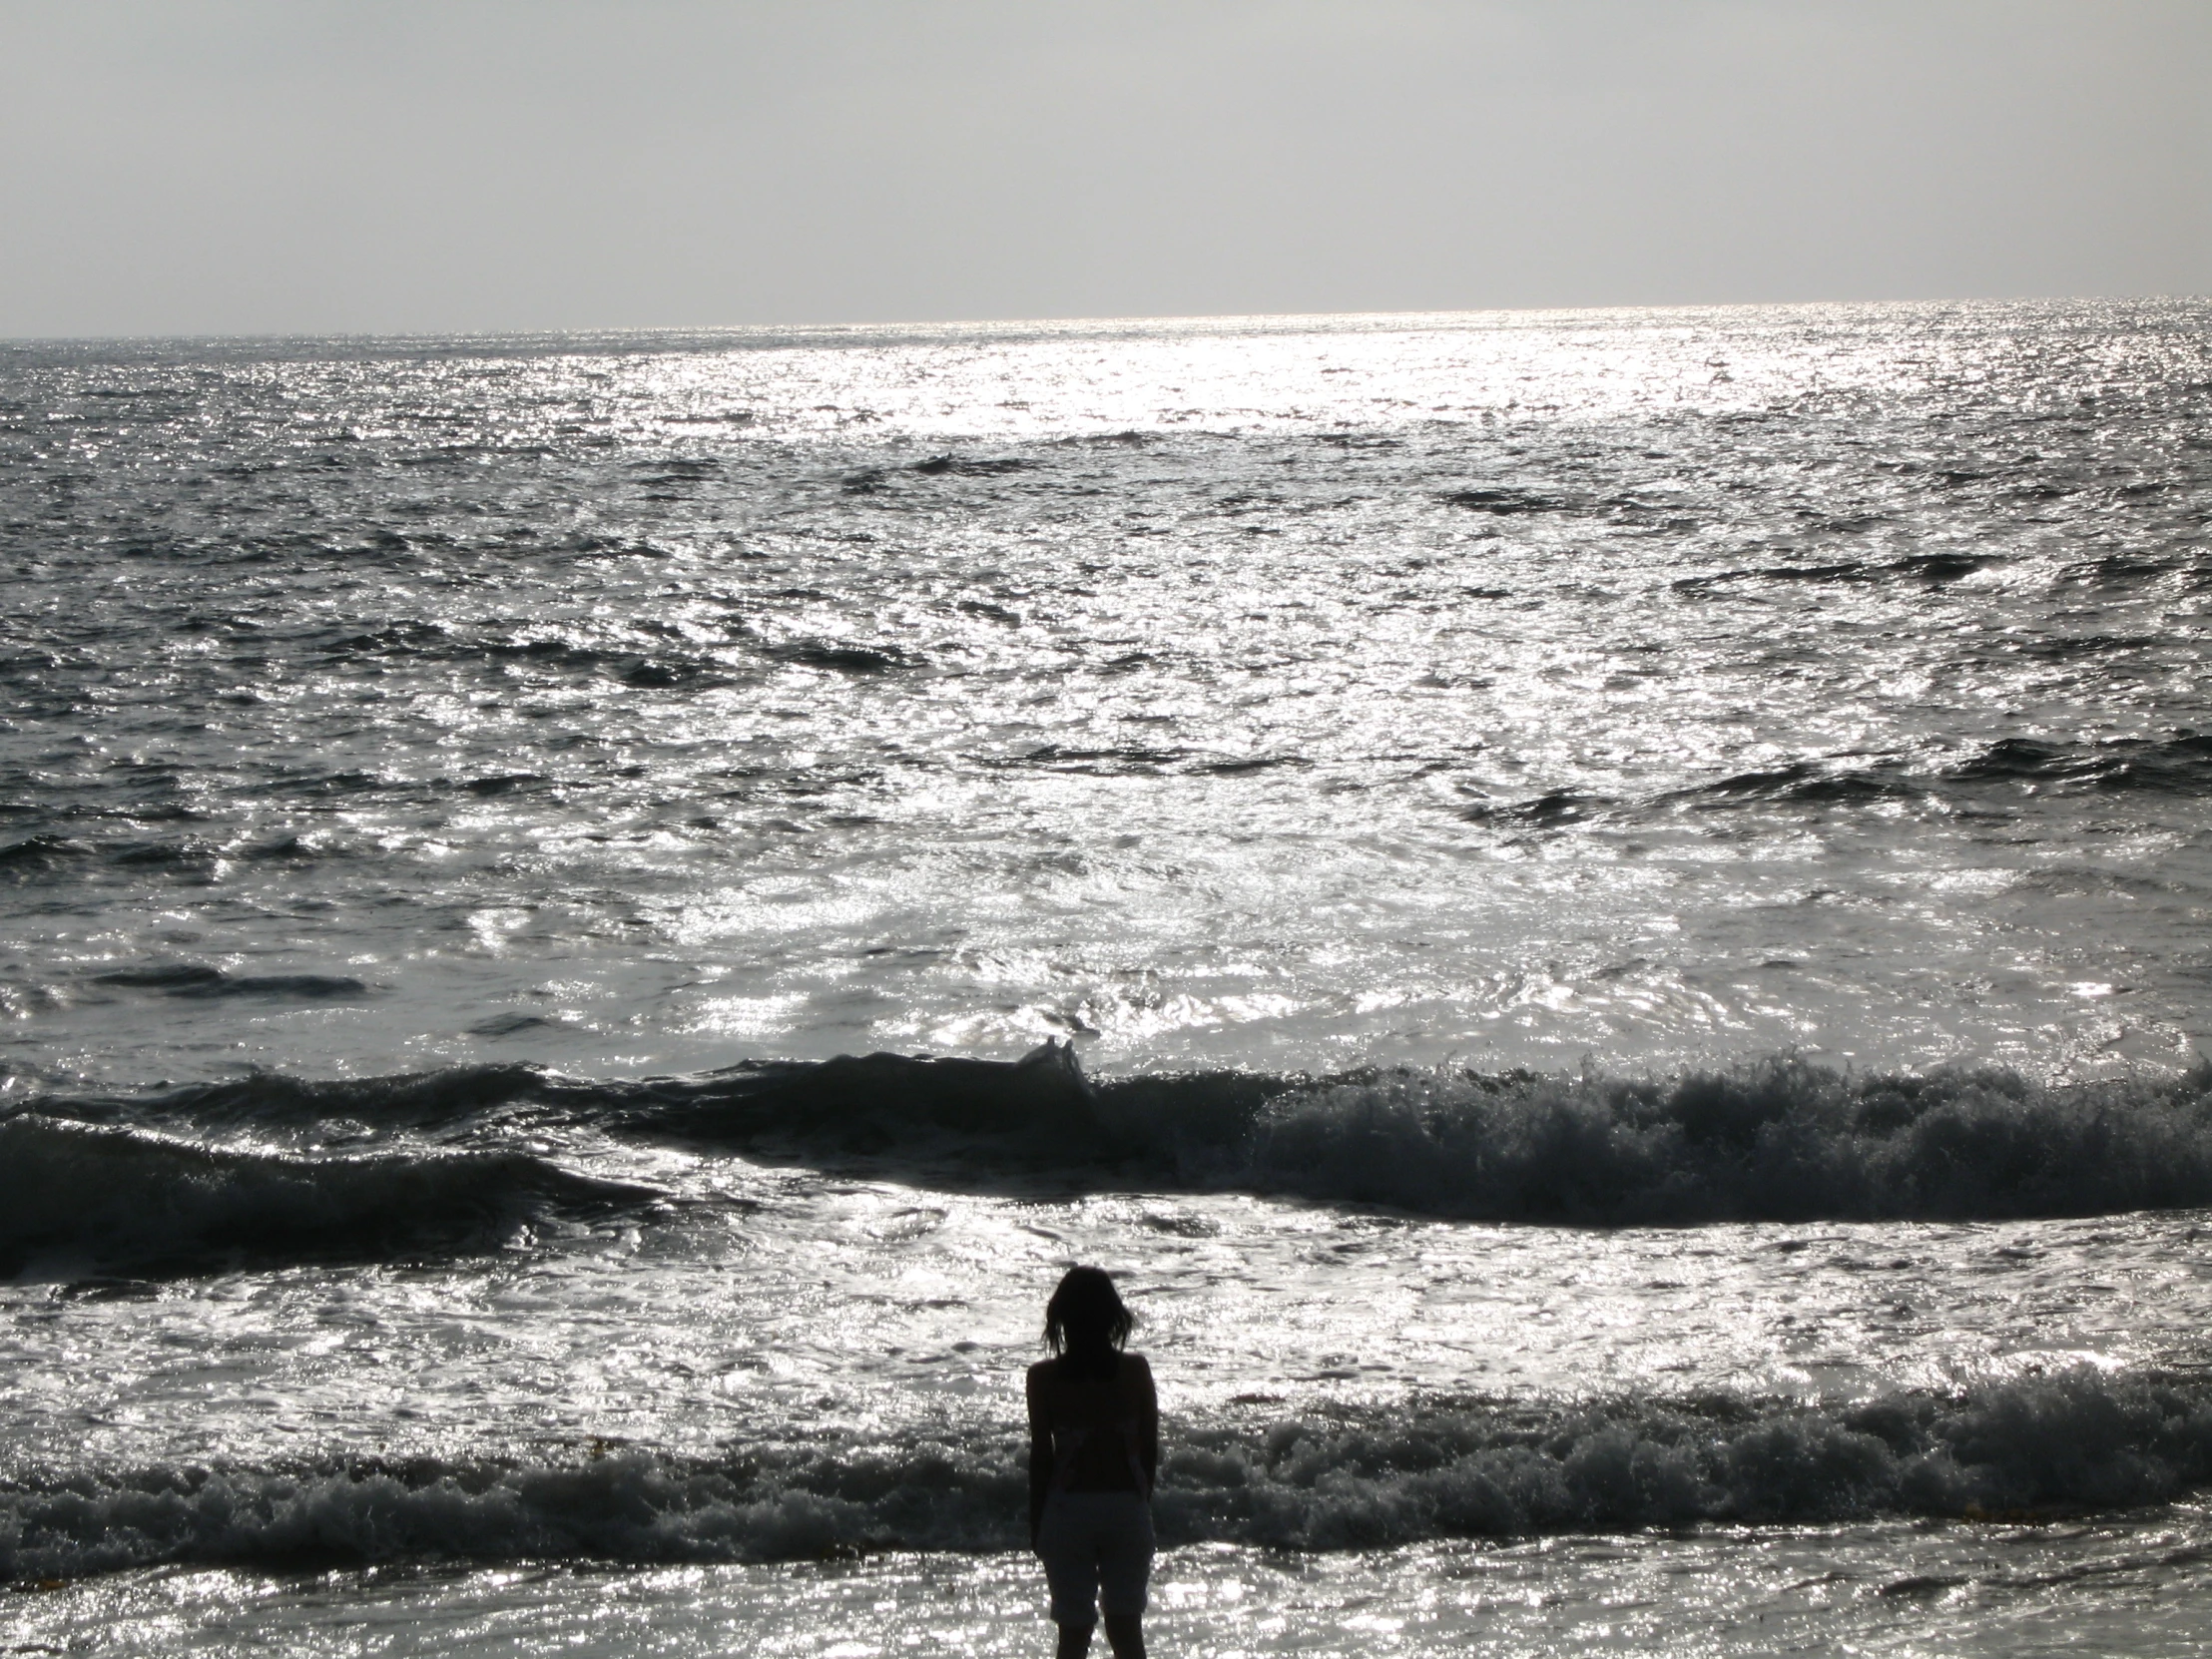 the woman is standing on the beach near the waves